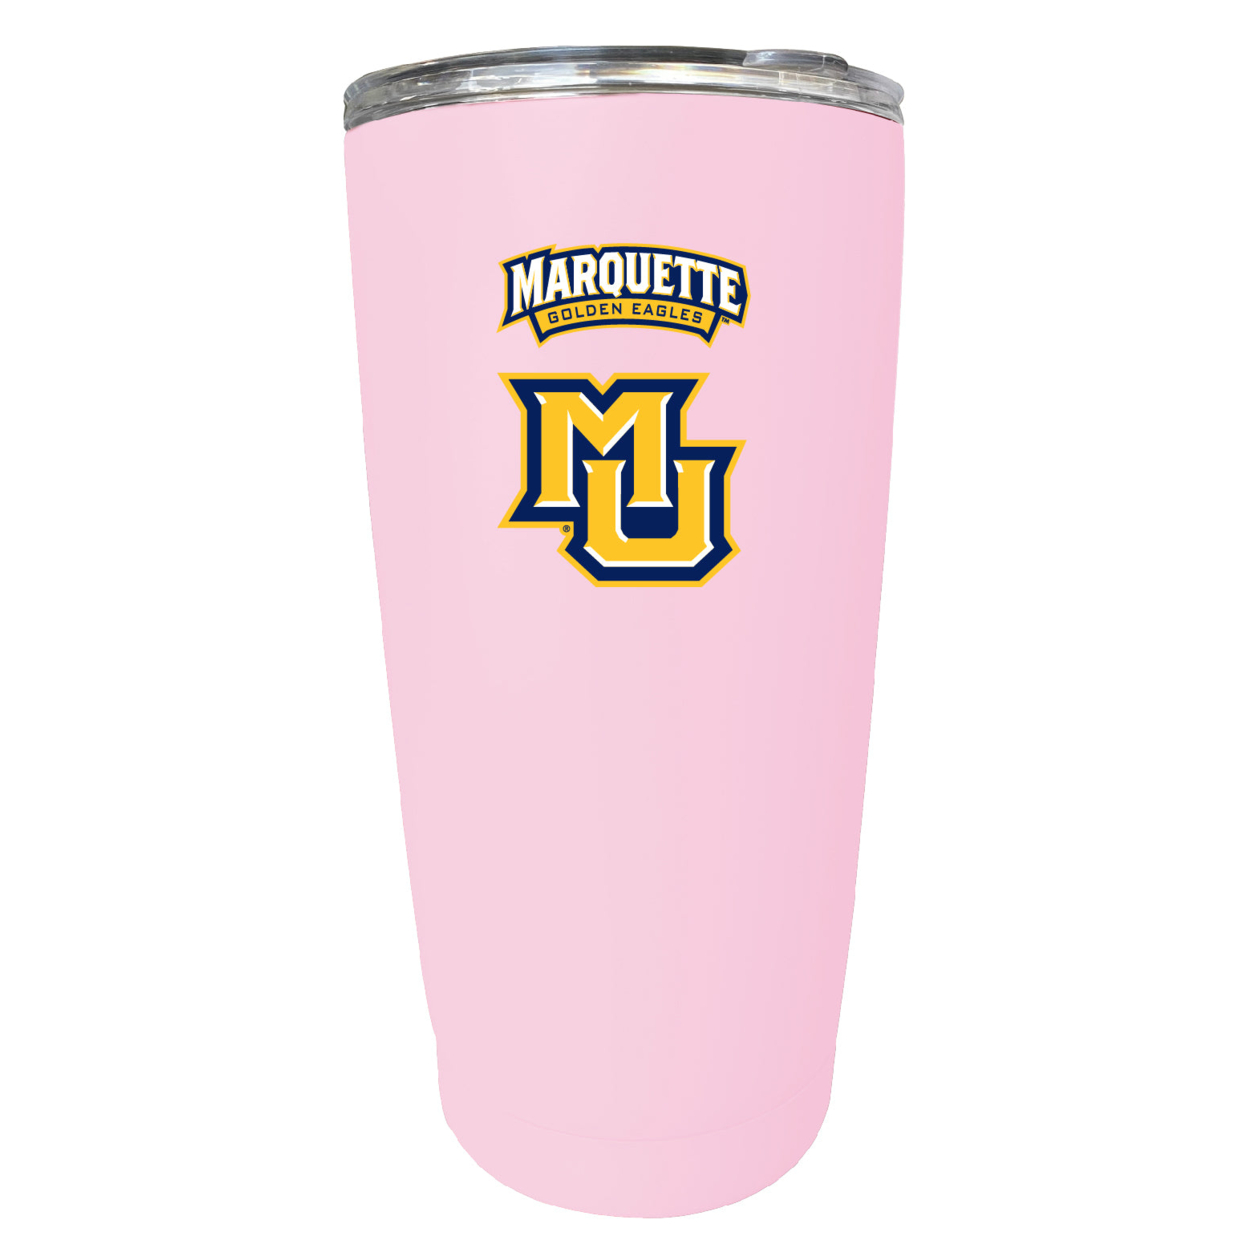 Marquette Golden Eagles 16 Oz Stainless Steel Insulated Tumbler - Yellow